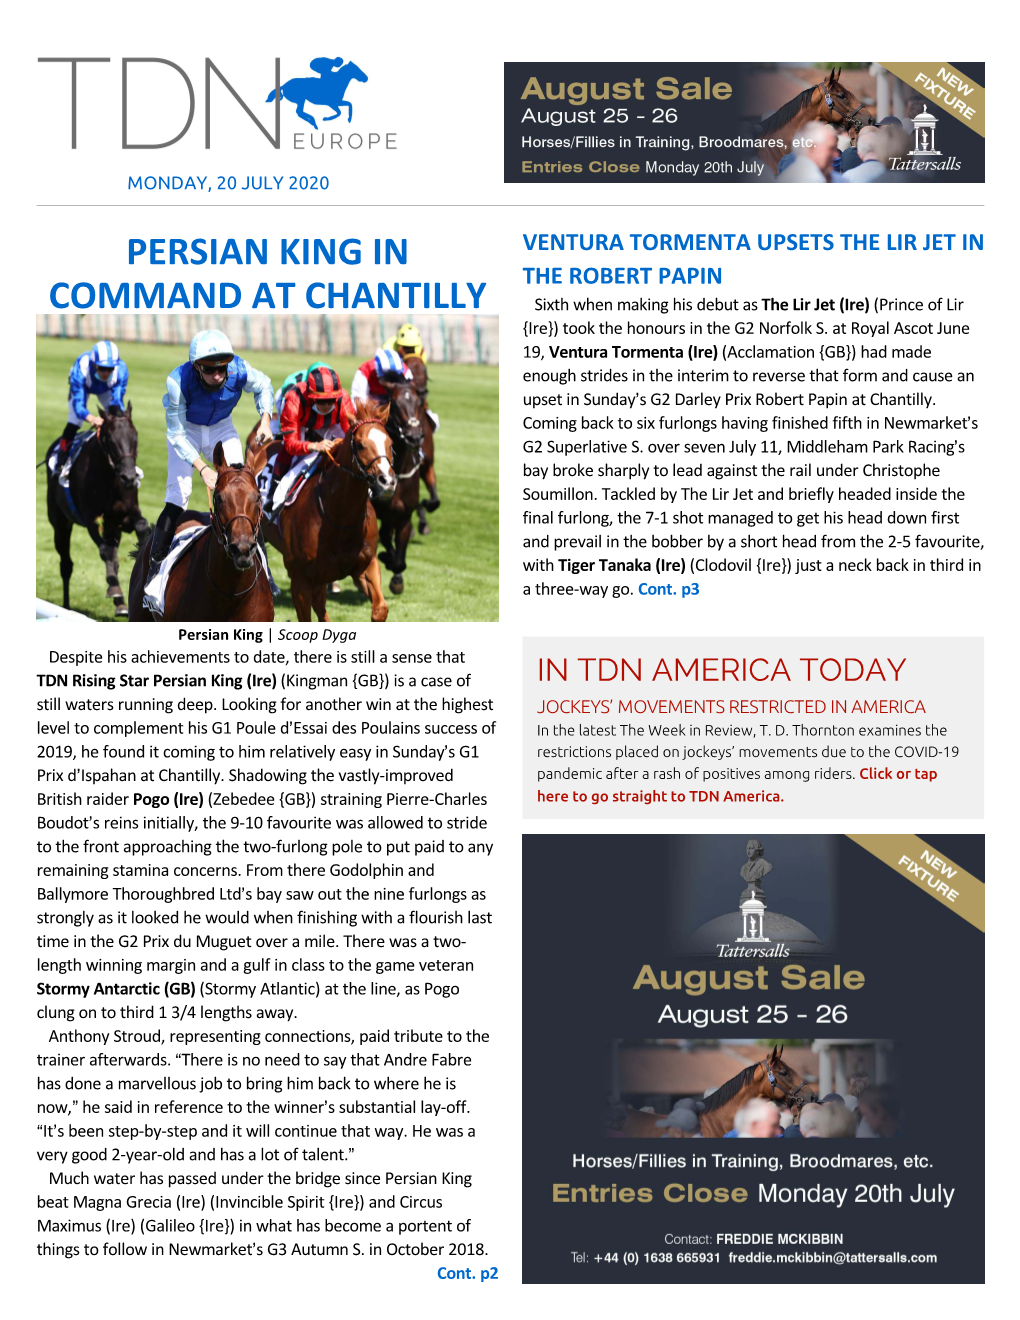 Persian King in Command at Chantilly